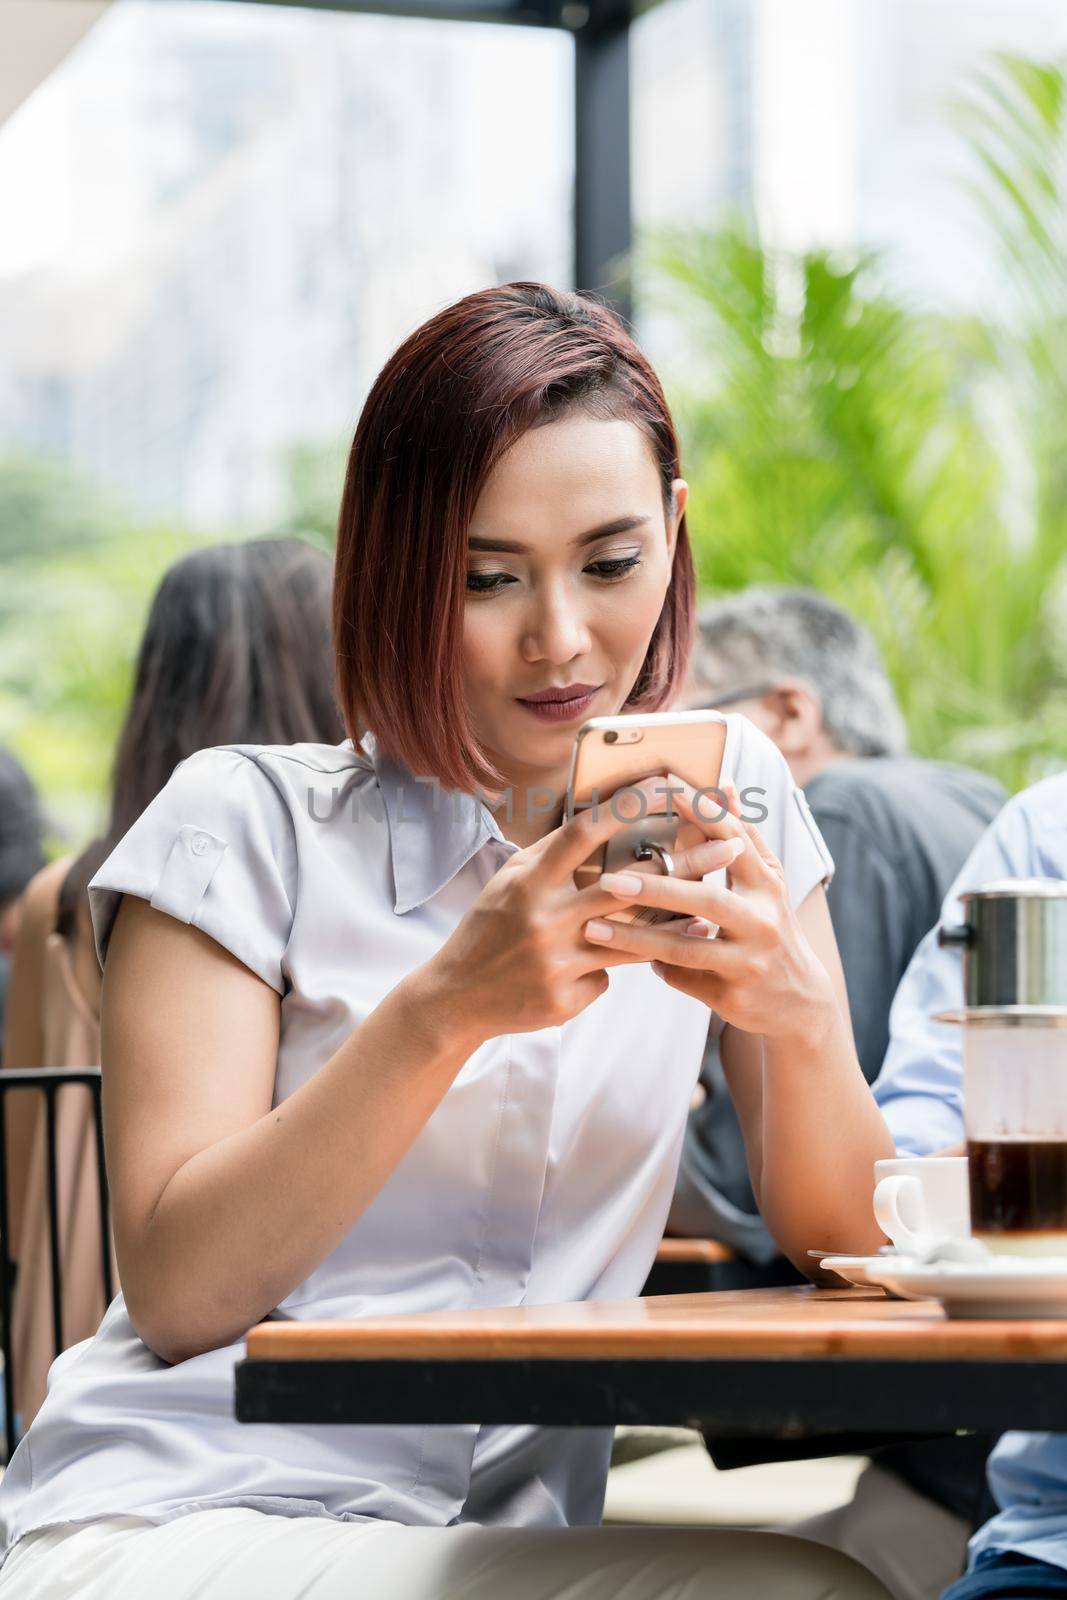 Portrait of a young Asian woman smiling while using a mobile phone connected to the internet outdoors at a coffee shop